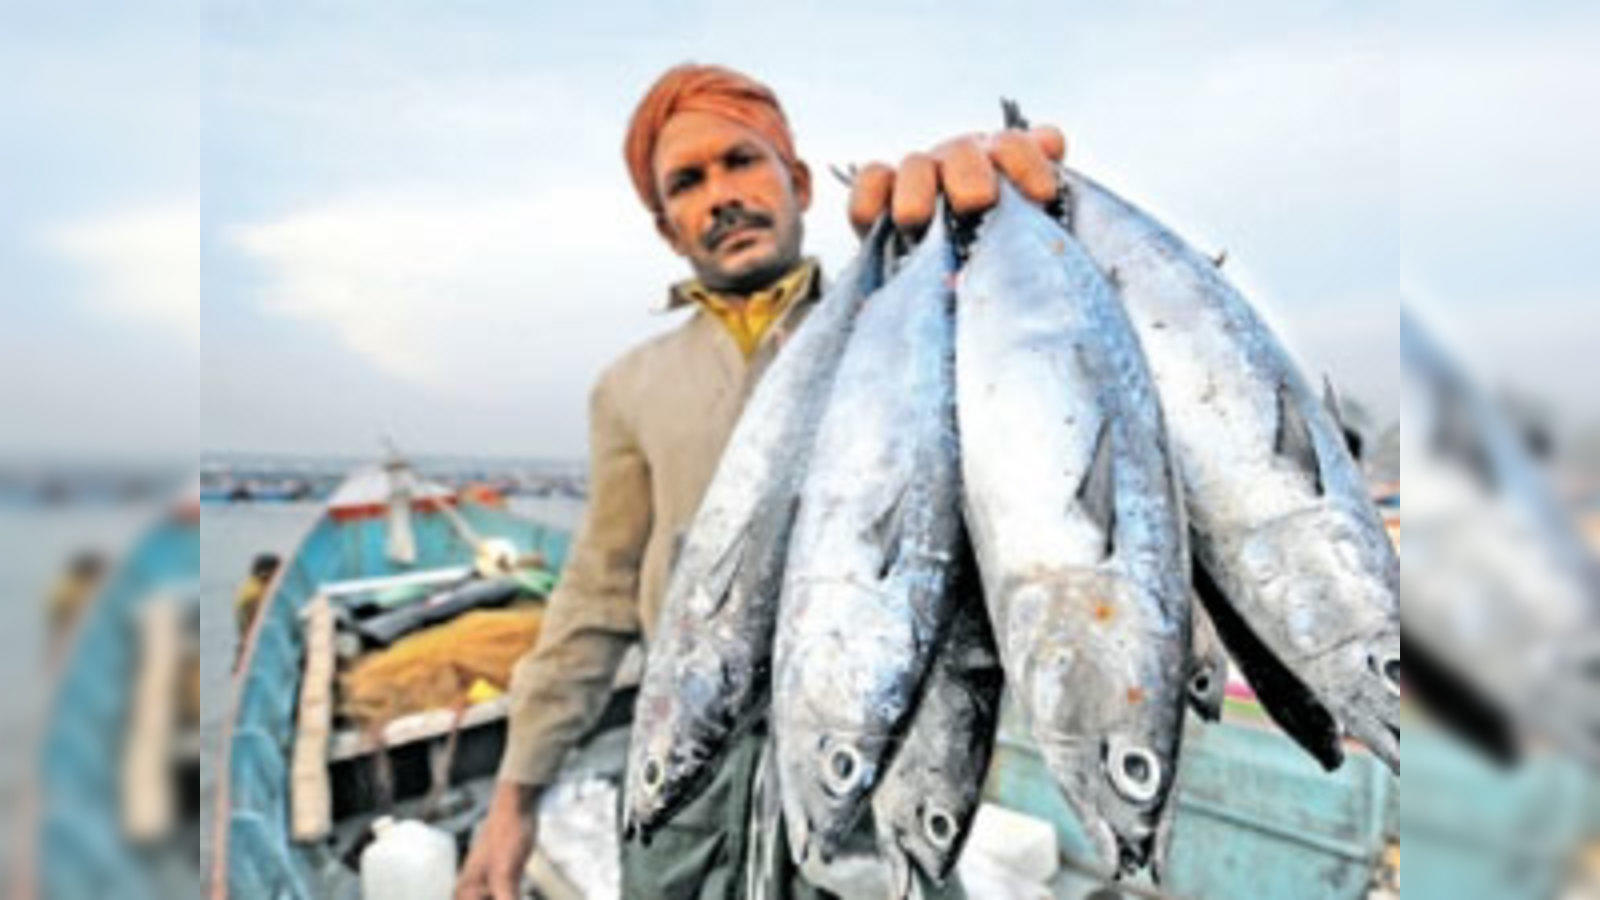 Problems plaguing Kerala's once-thriving fishing industry - The